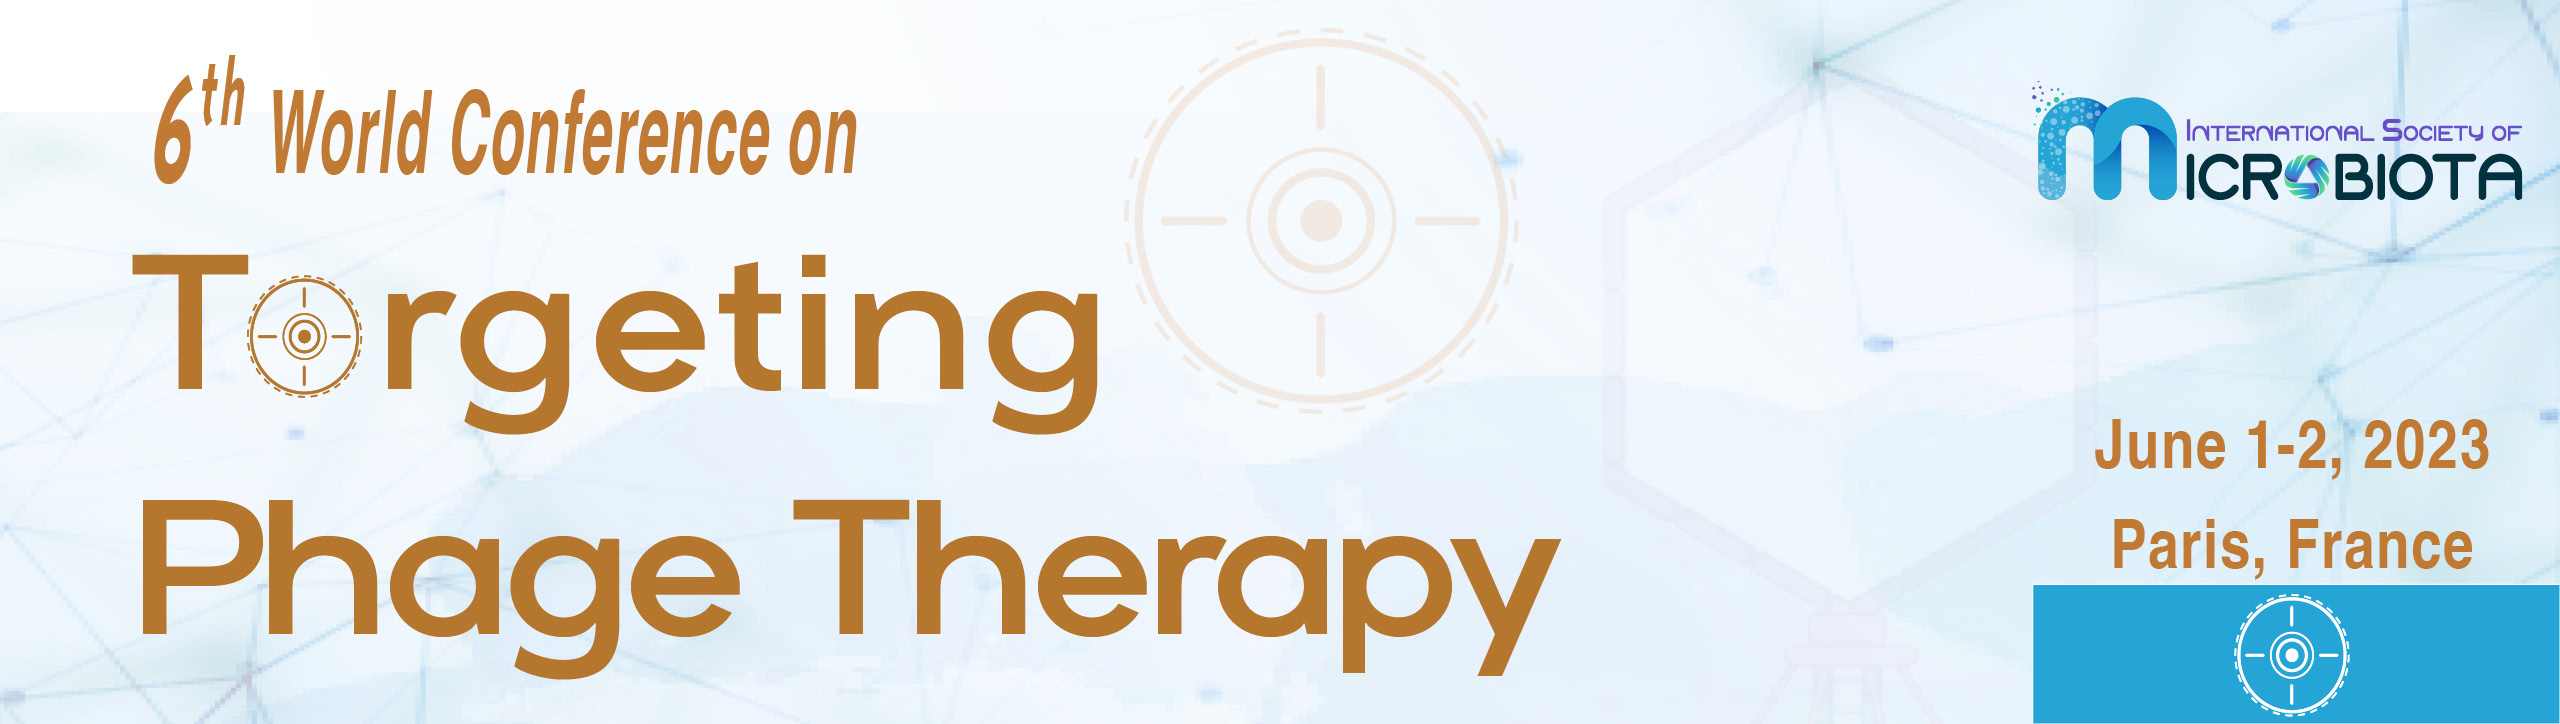 6th World Congress on Targeting Phage Therapy 2023 - June 1-2, 2023 - Paris, France